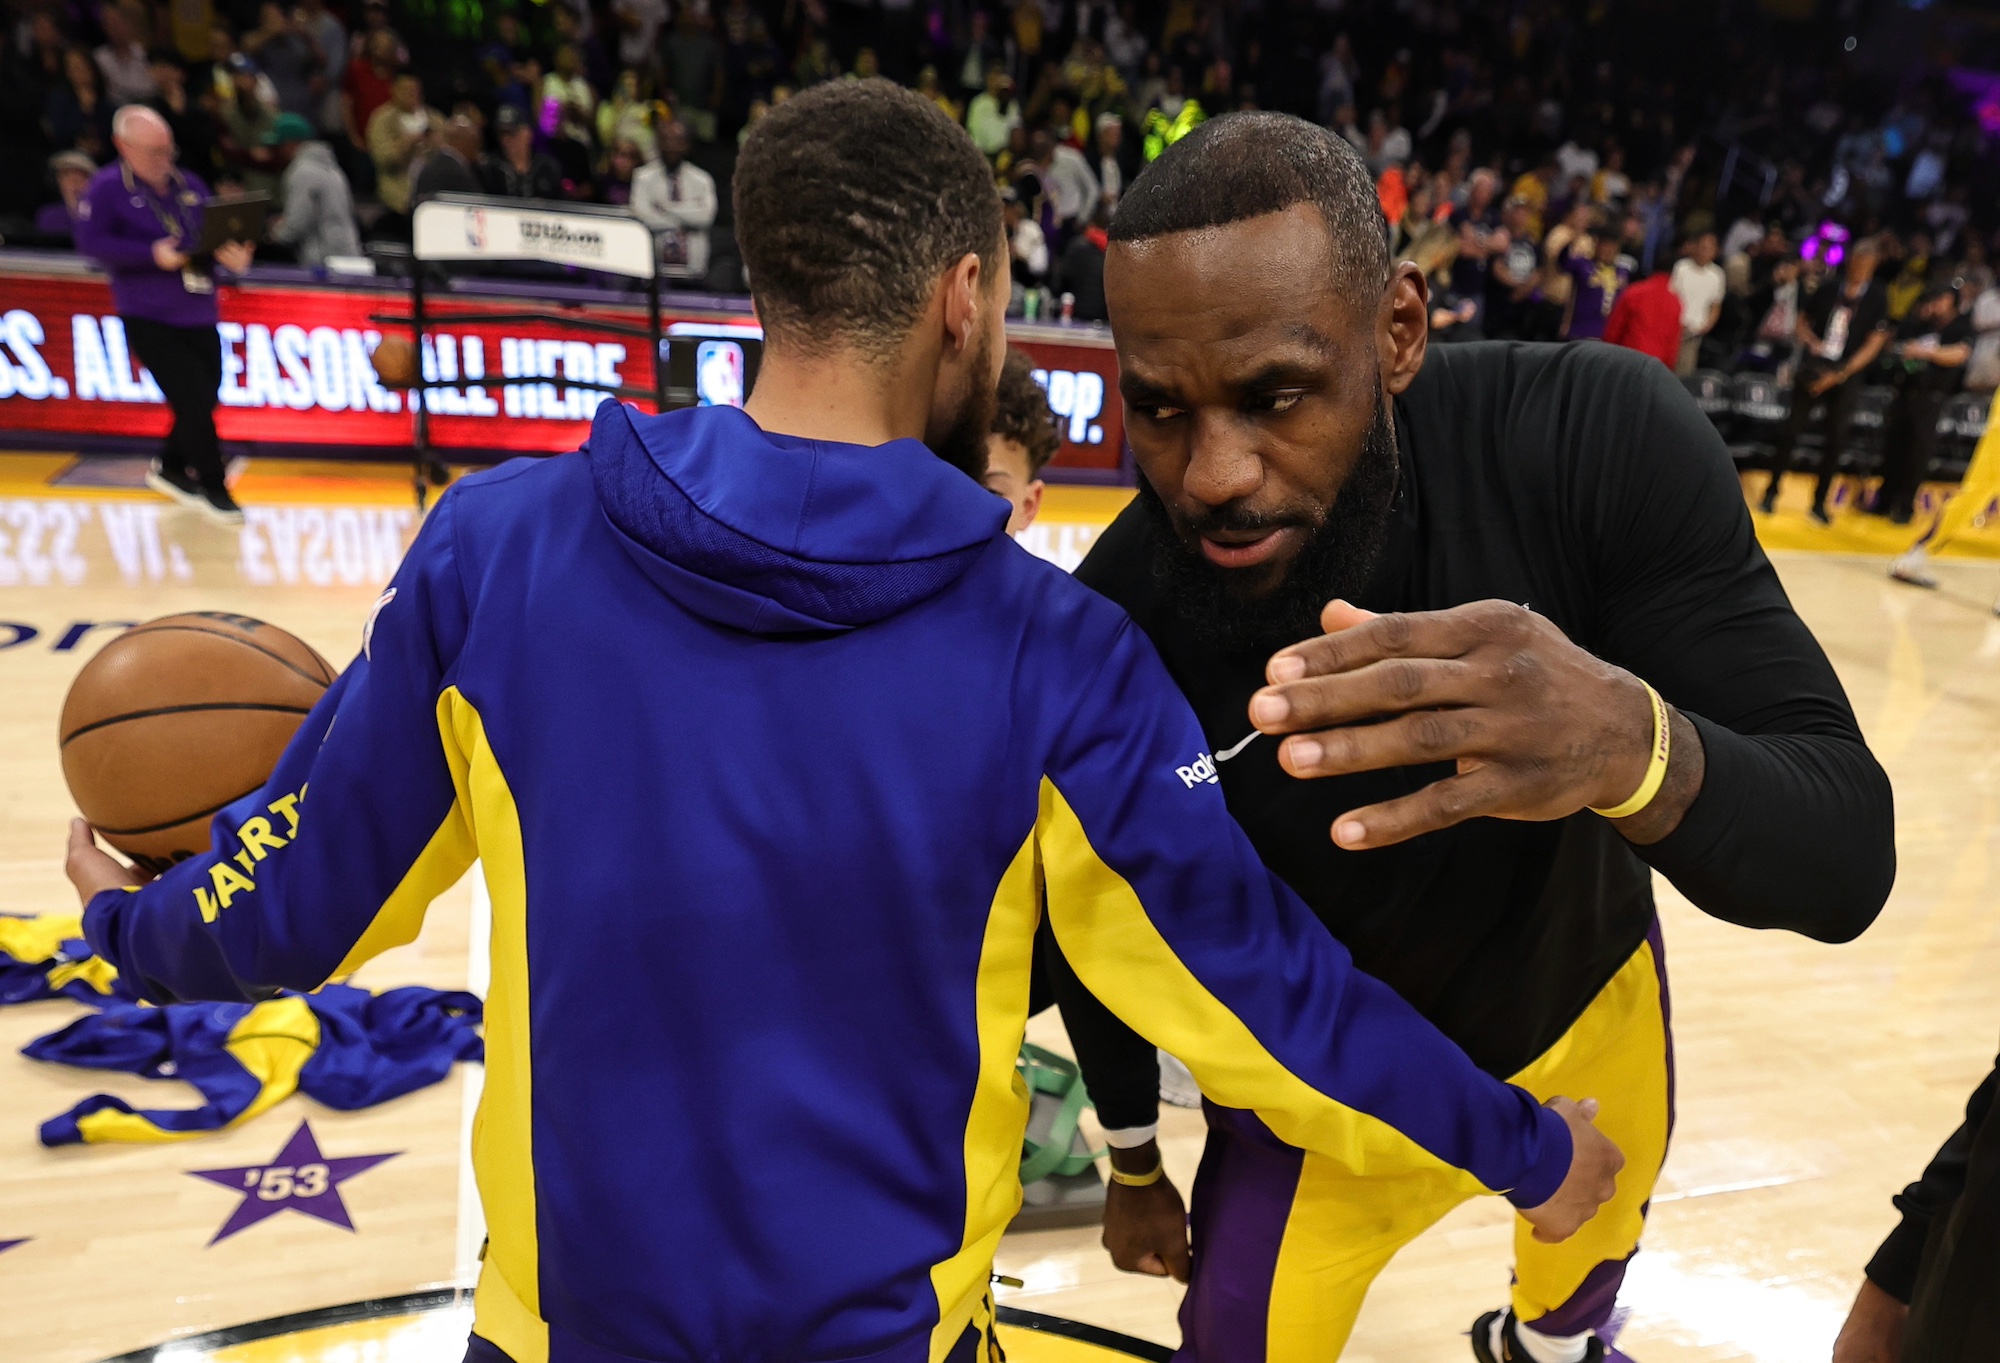 LOS ANGELES, CA - APRIL 9: Stephen Curry #30 of the Golden State Warriors &amp; LeBron James #23 of the Los Angeles Lakers embrace before the game on April 9, 2024 at Cryto.com Arena in Los Angeles, California. NOTE TO USER: User expressly acknowledges and agrees that, by downloading and/or using this photograph, user is consenting to the terms and conditions of the Getty Images License Agreement. Mandatory Copyright Notice: Copyright 2024 NBAE (Photo by Jim Poorten/NBAE via Getty Images)